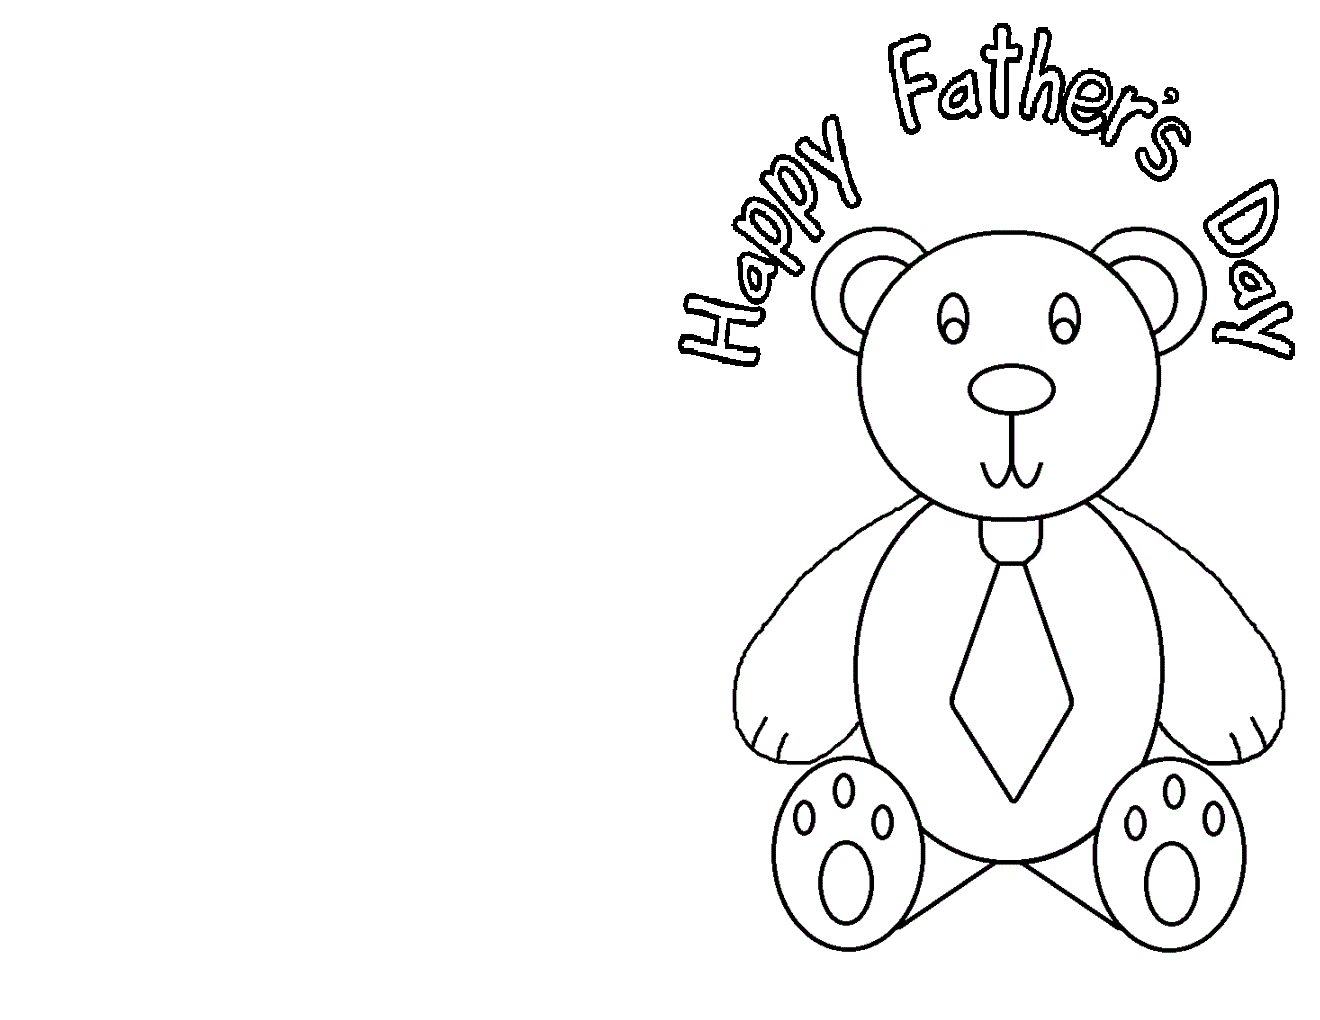 happy-fathers-day-teddy-bear-cut-out-card-coloring-page-for kids-printable